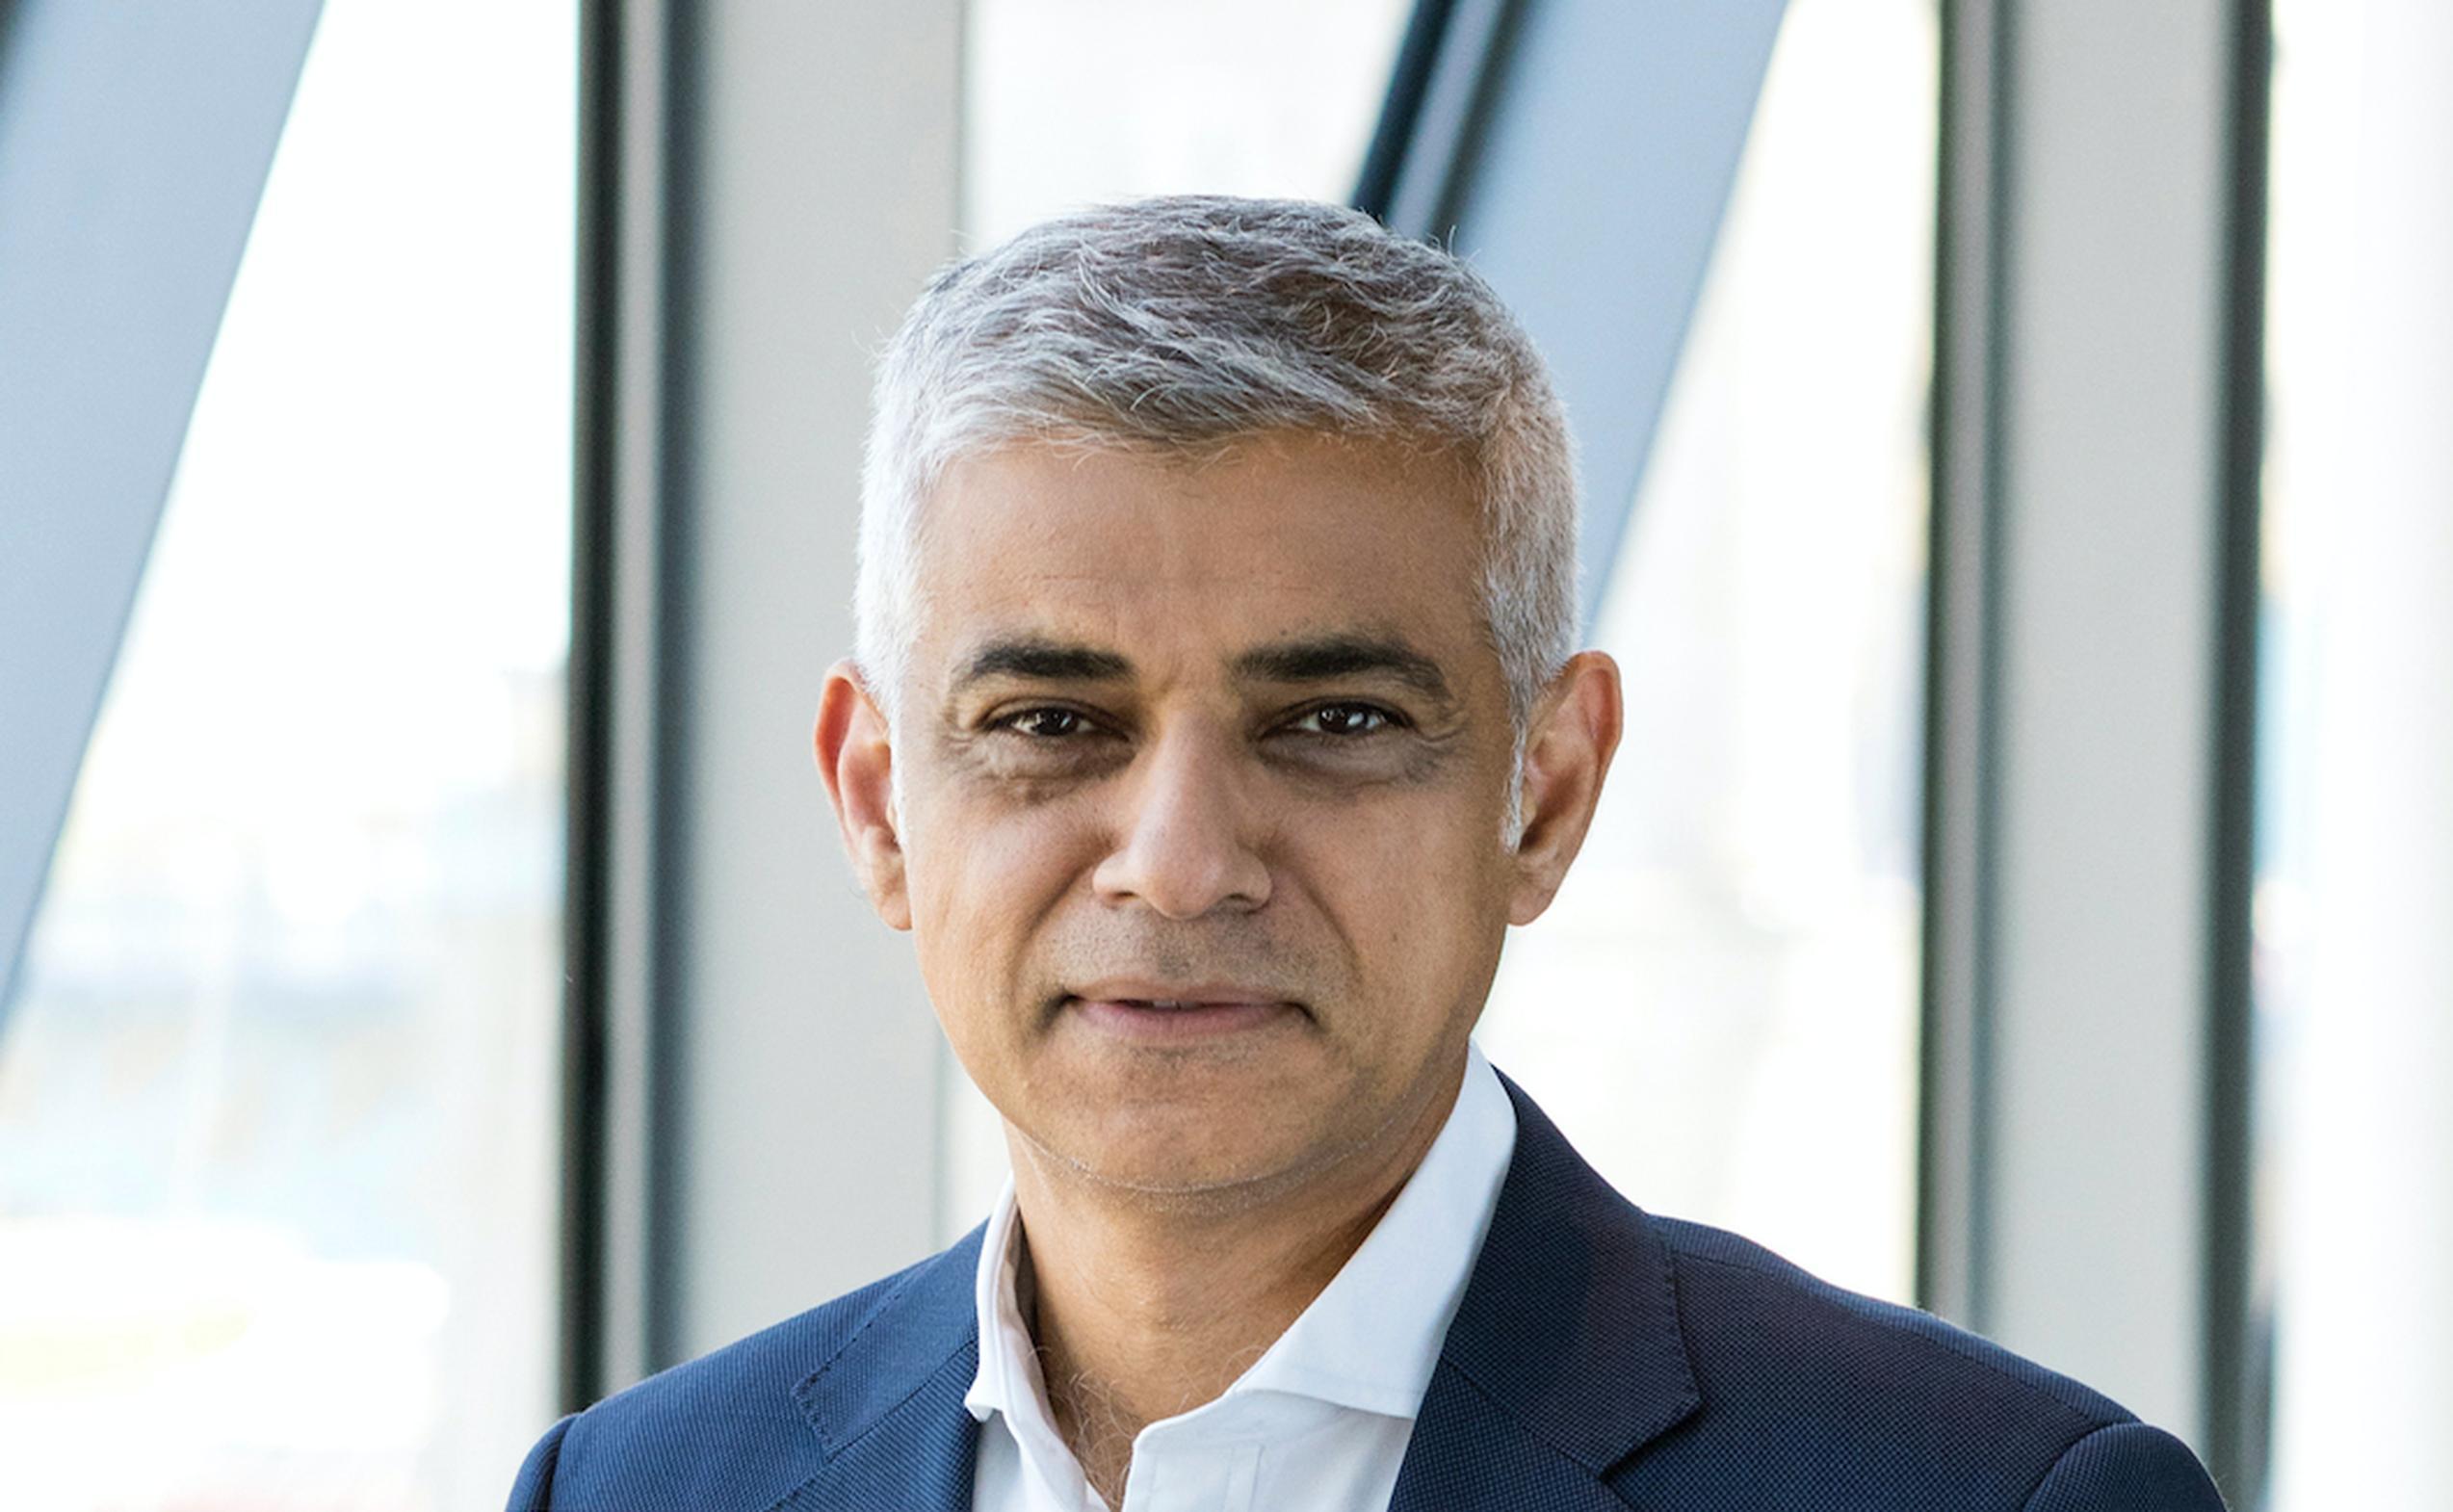 Sadiq Khan: This agreement makes reference to future capital investment for TfL, but it’s essential that this quickly turns into a concrete commitment from the Government